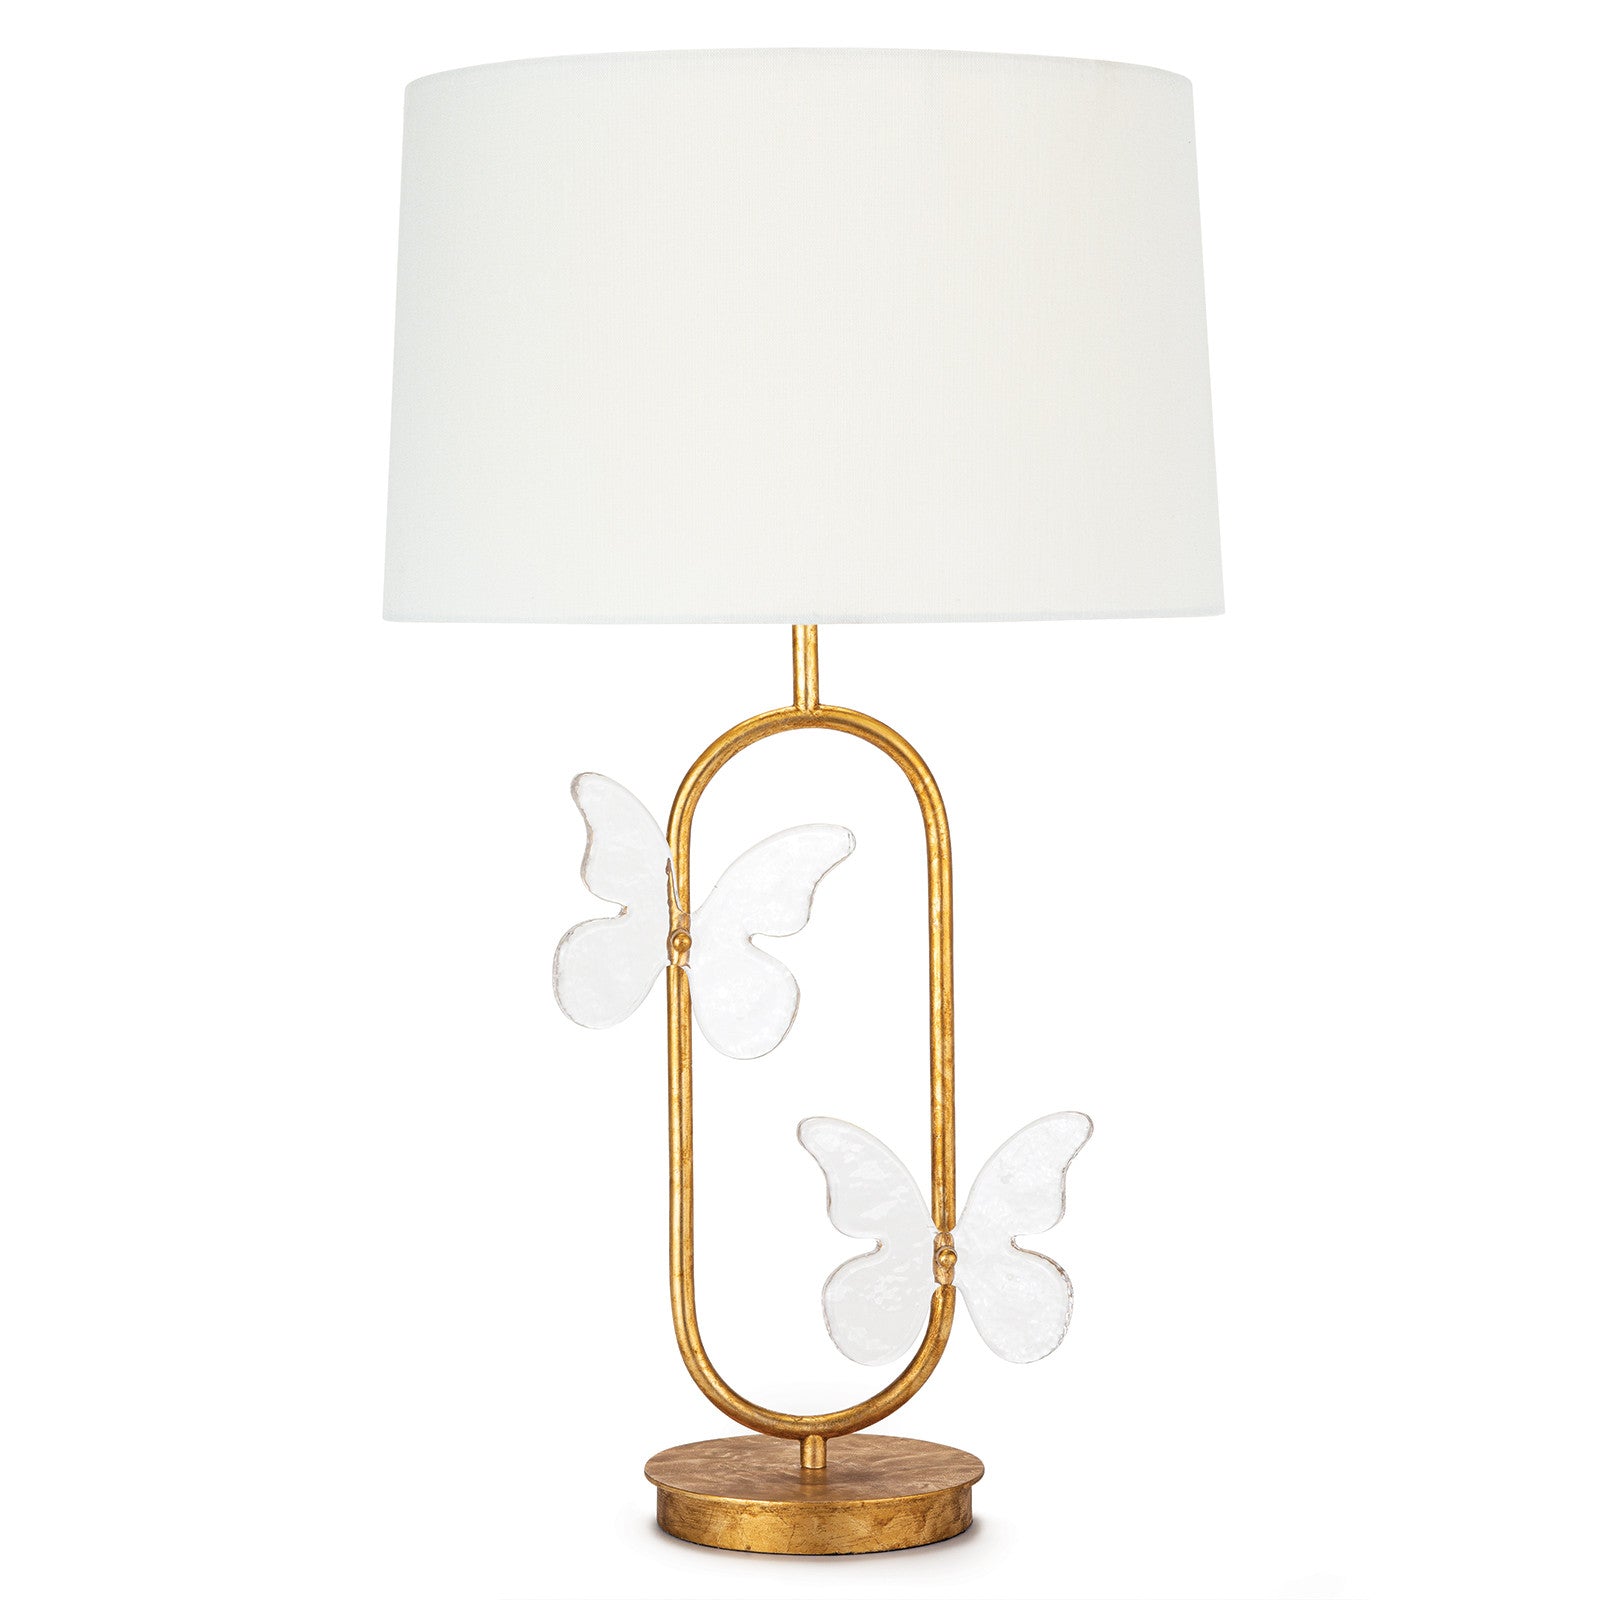 This Monarch Oval Table Lamp features two clear glass butterflies and a steel frame dusted in a light gold leaf finish. We'd love to see this in your bedroom, office, or other space! Overall Dimensions: 17"w x 17"d x 27.5"h